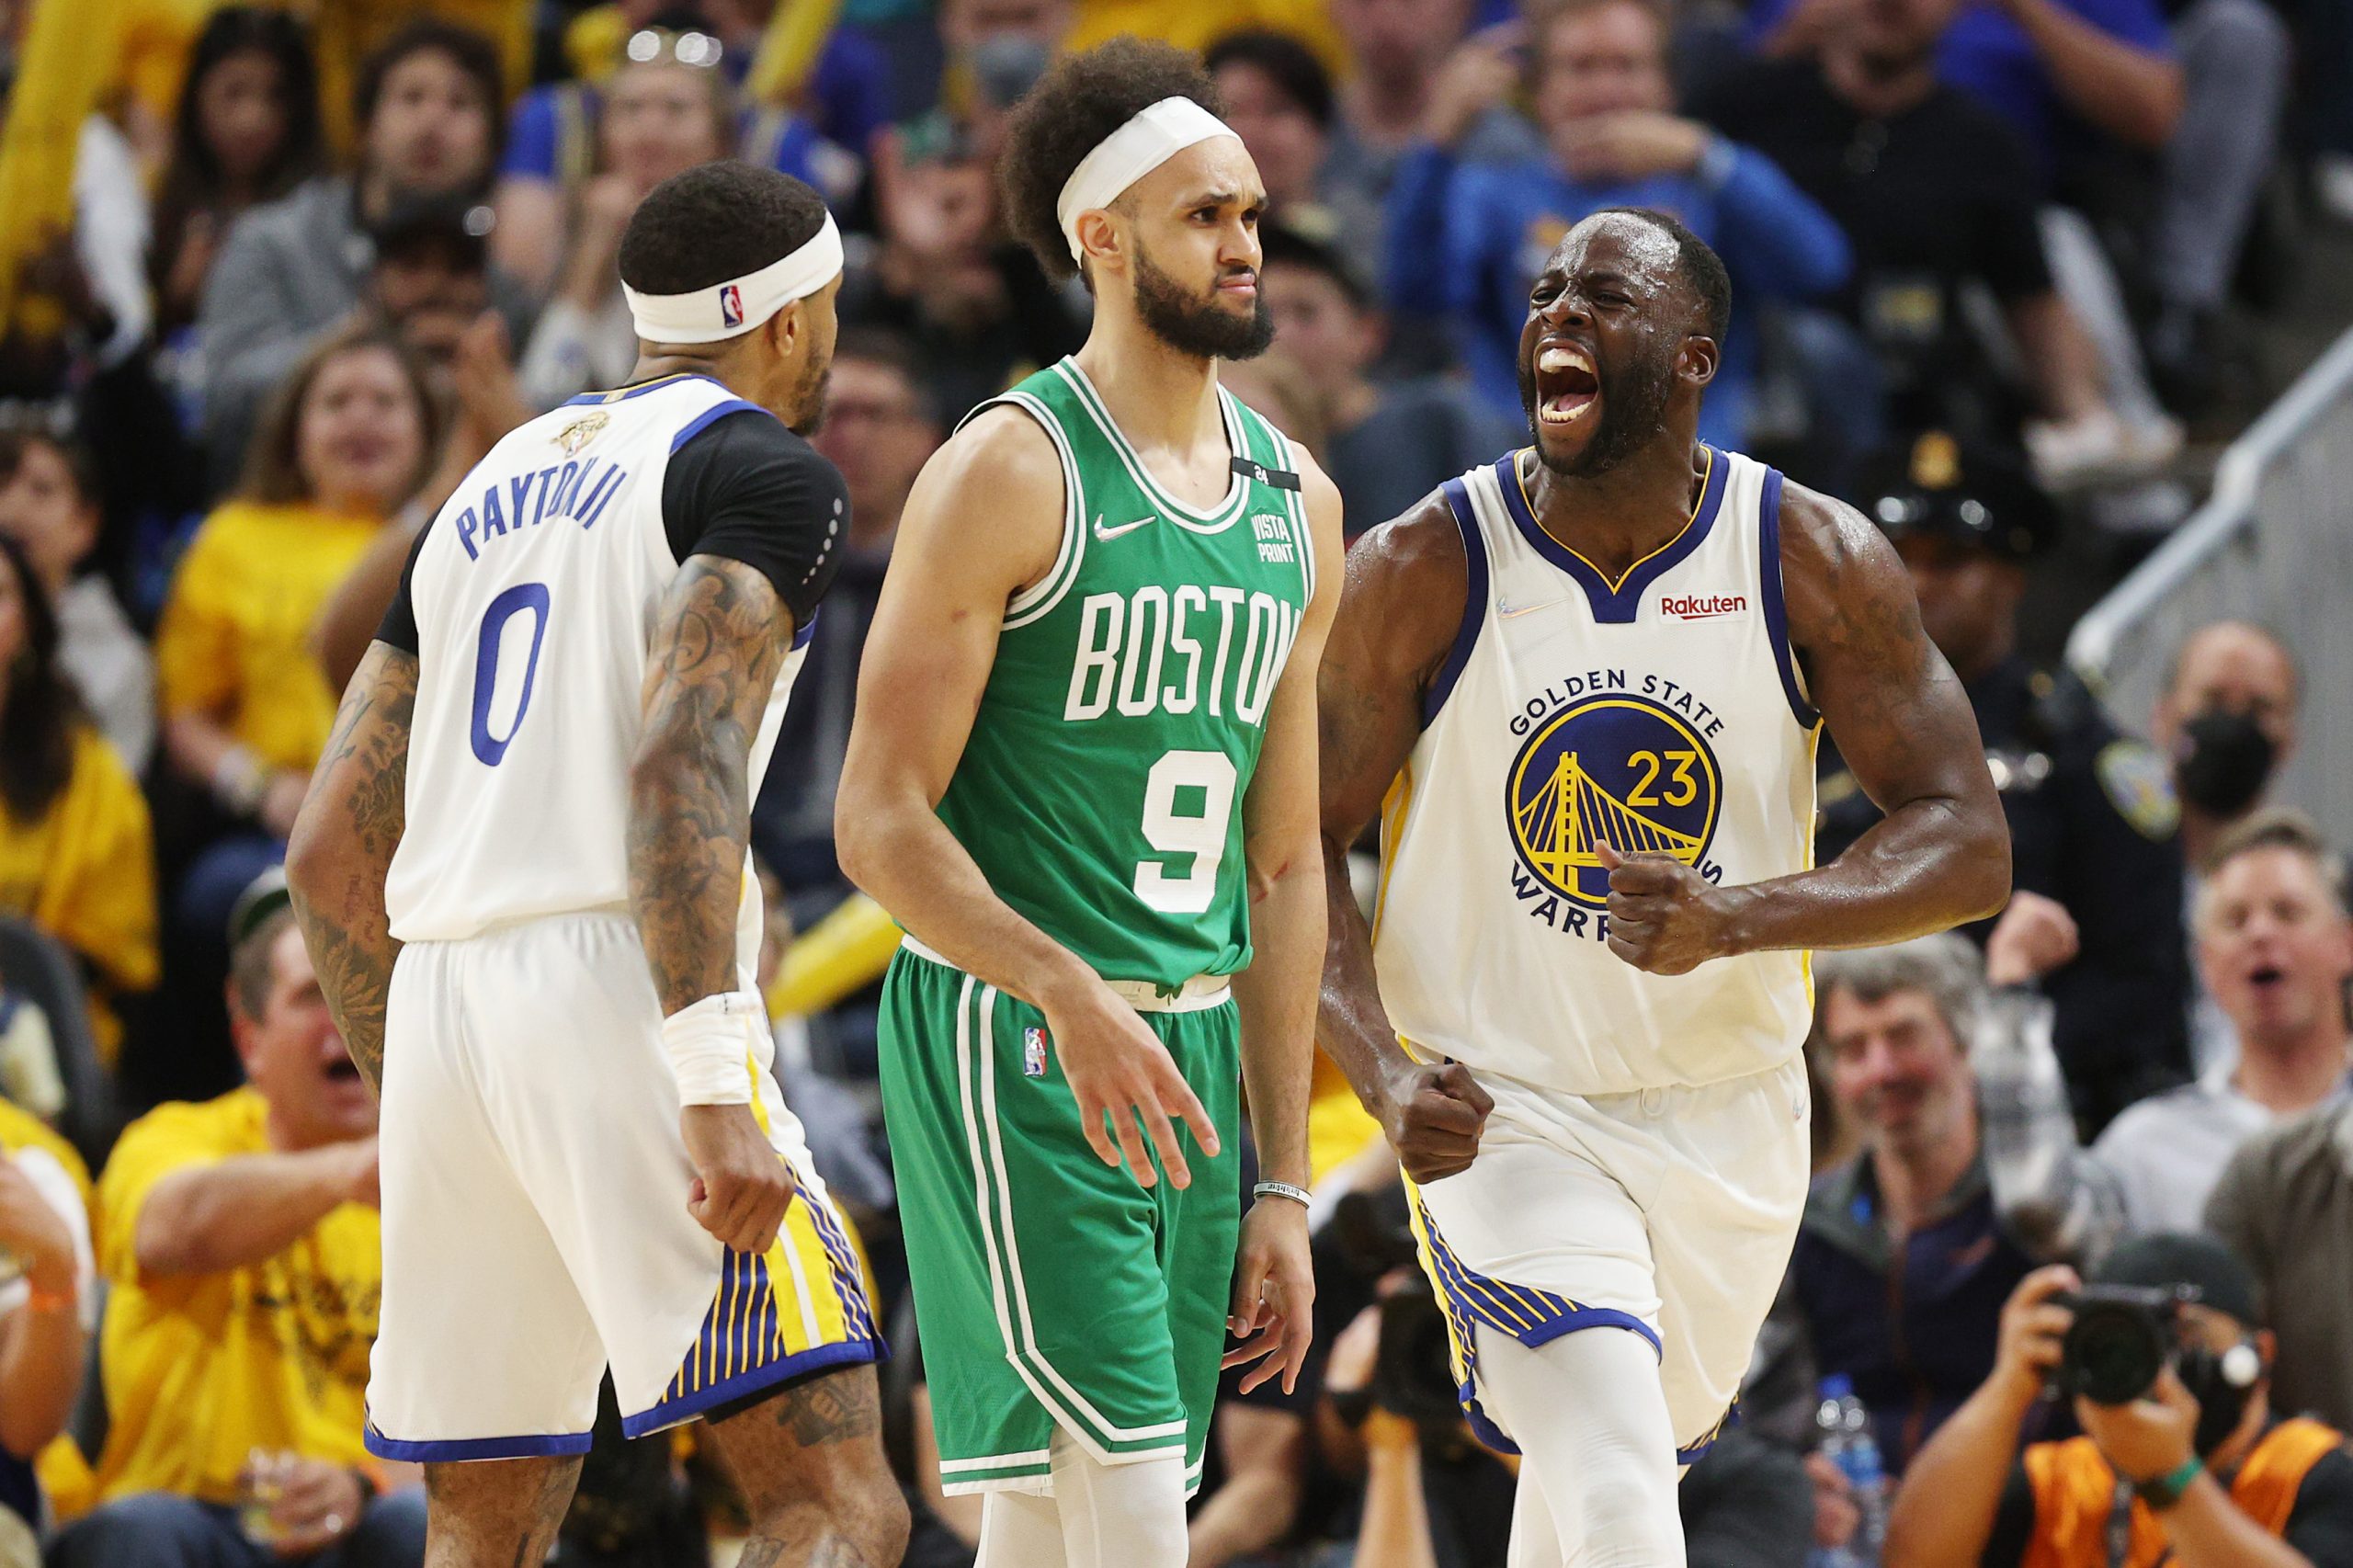 Draymond Green of the Golden State Warriors reacts during the third quarter against the Boston Celtics.